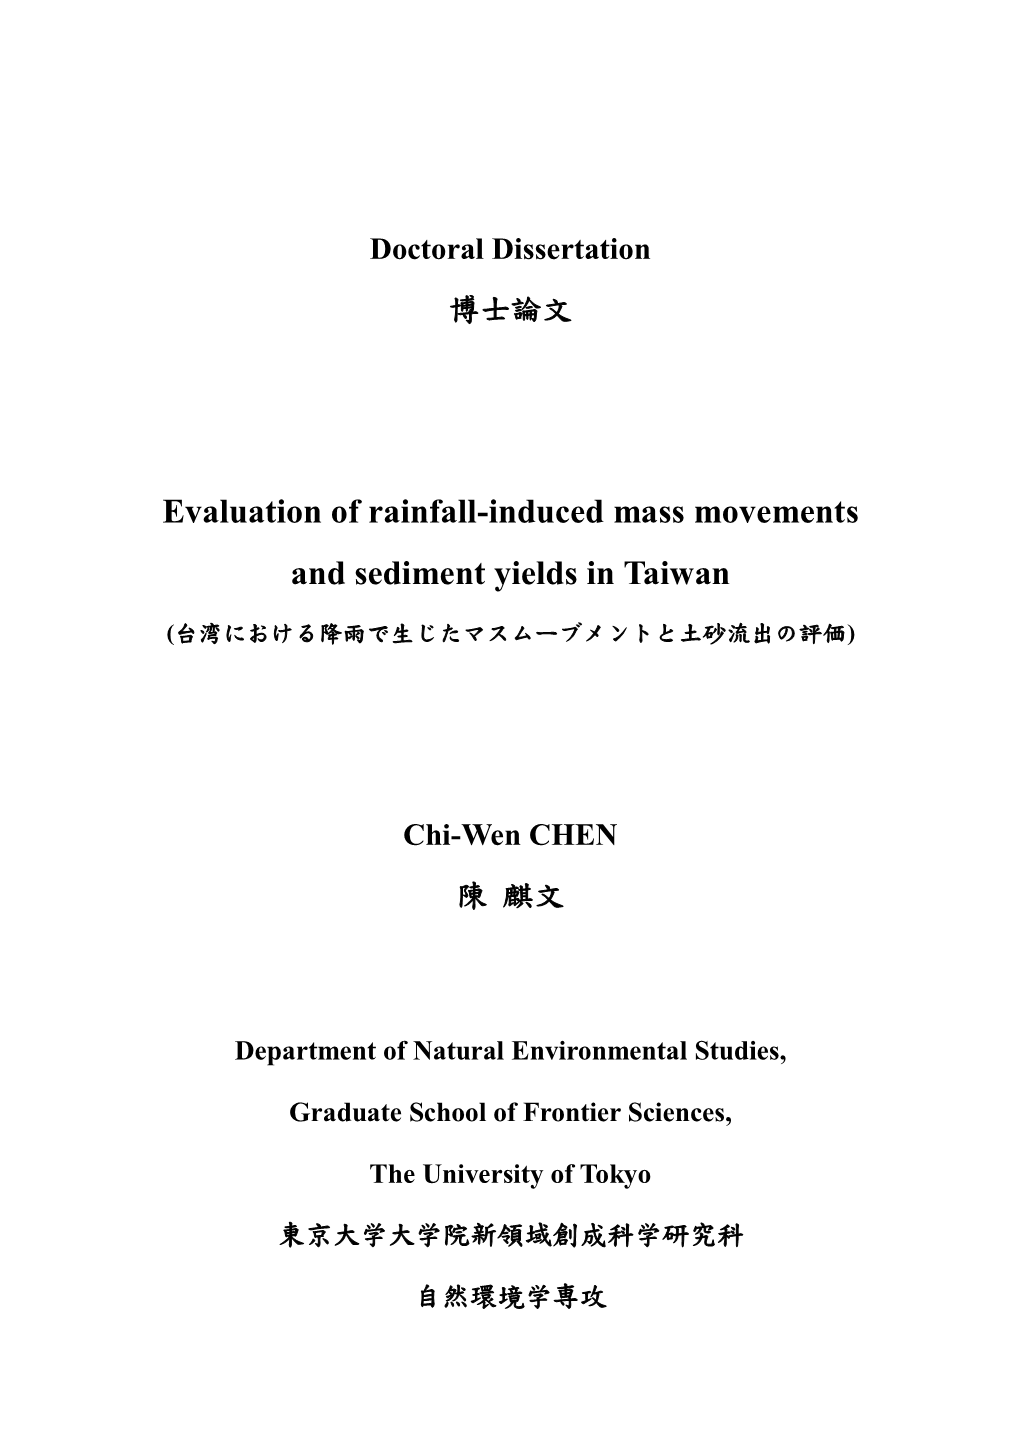 Evaluation of Rainfall-Induced Mass Movements and Sediment Yields in Taiwan